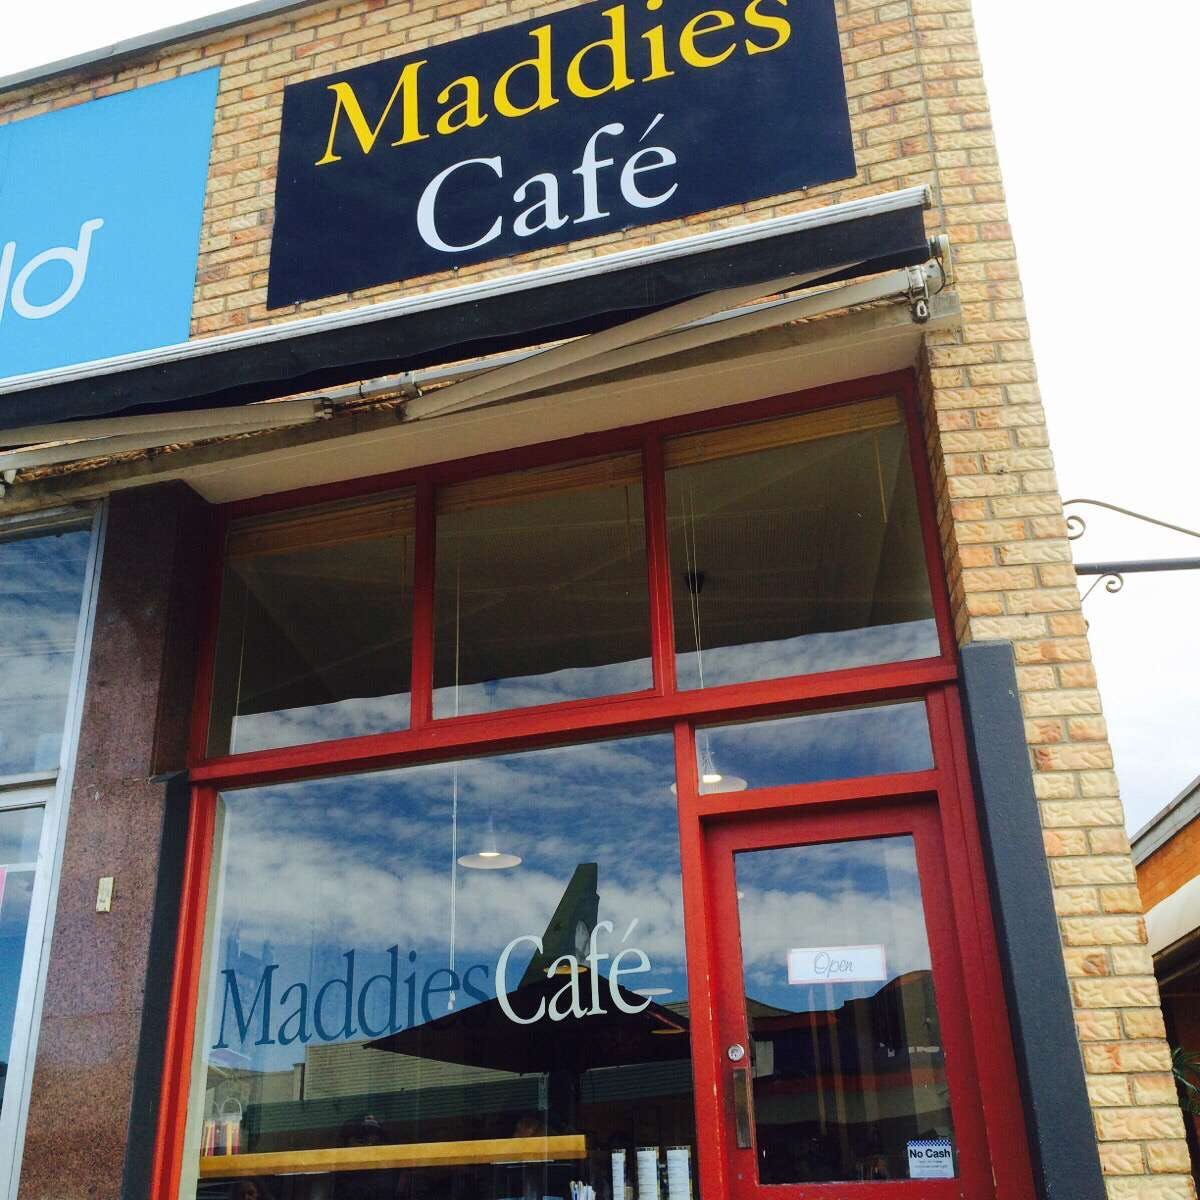 Maddies Cafe - Food Delivery Shop